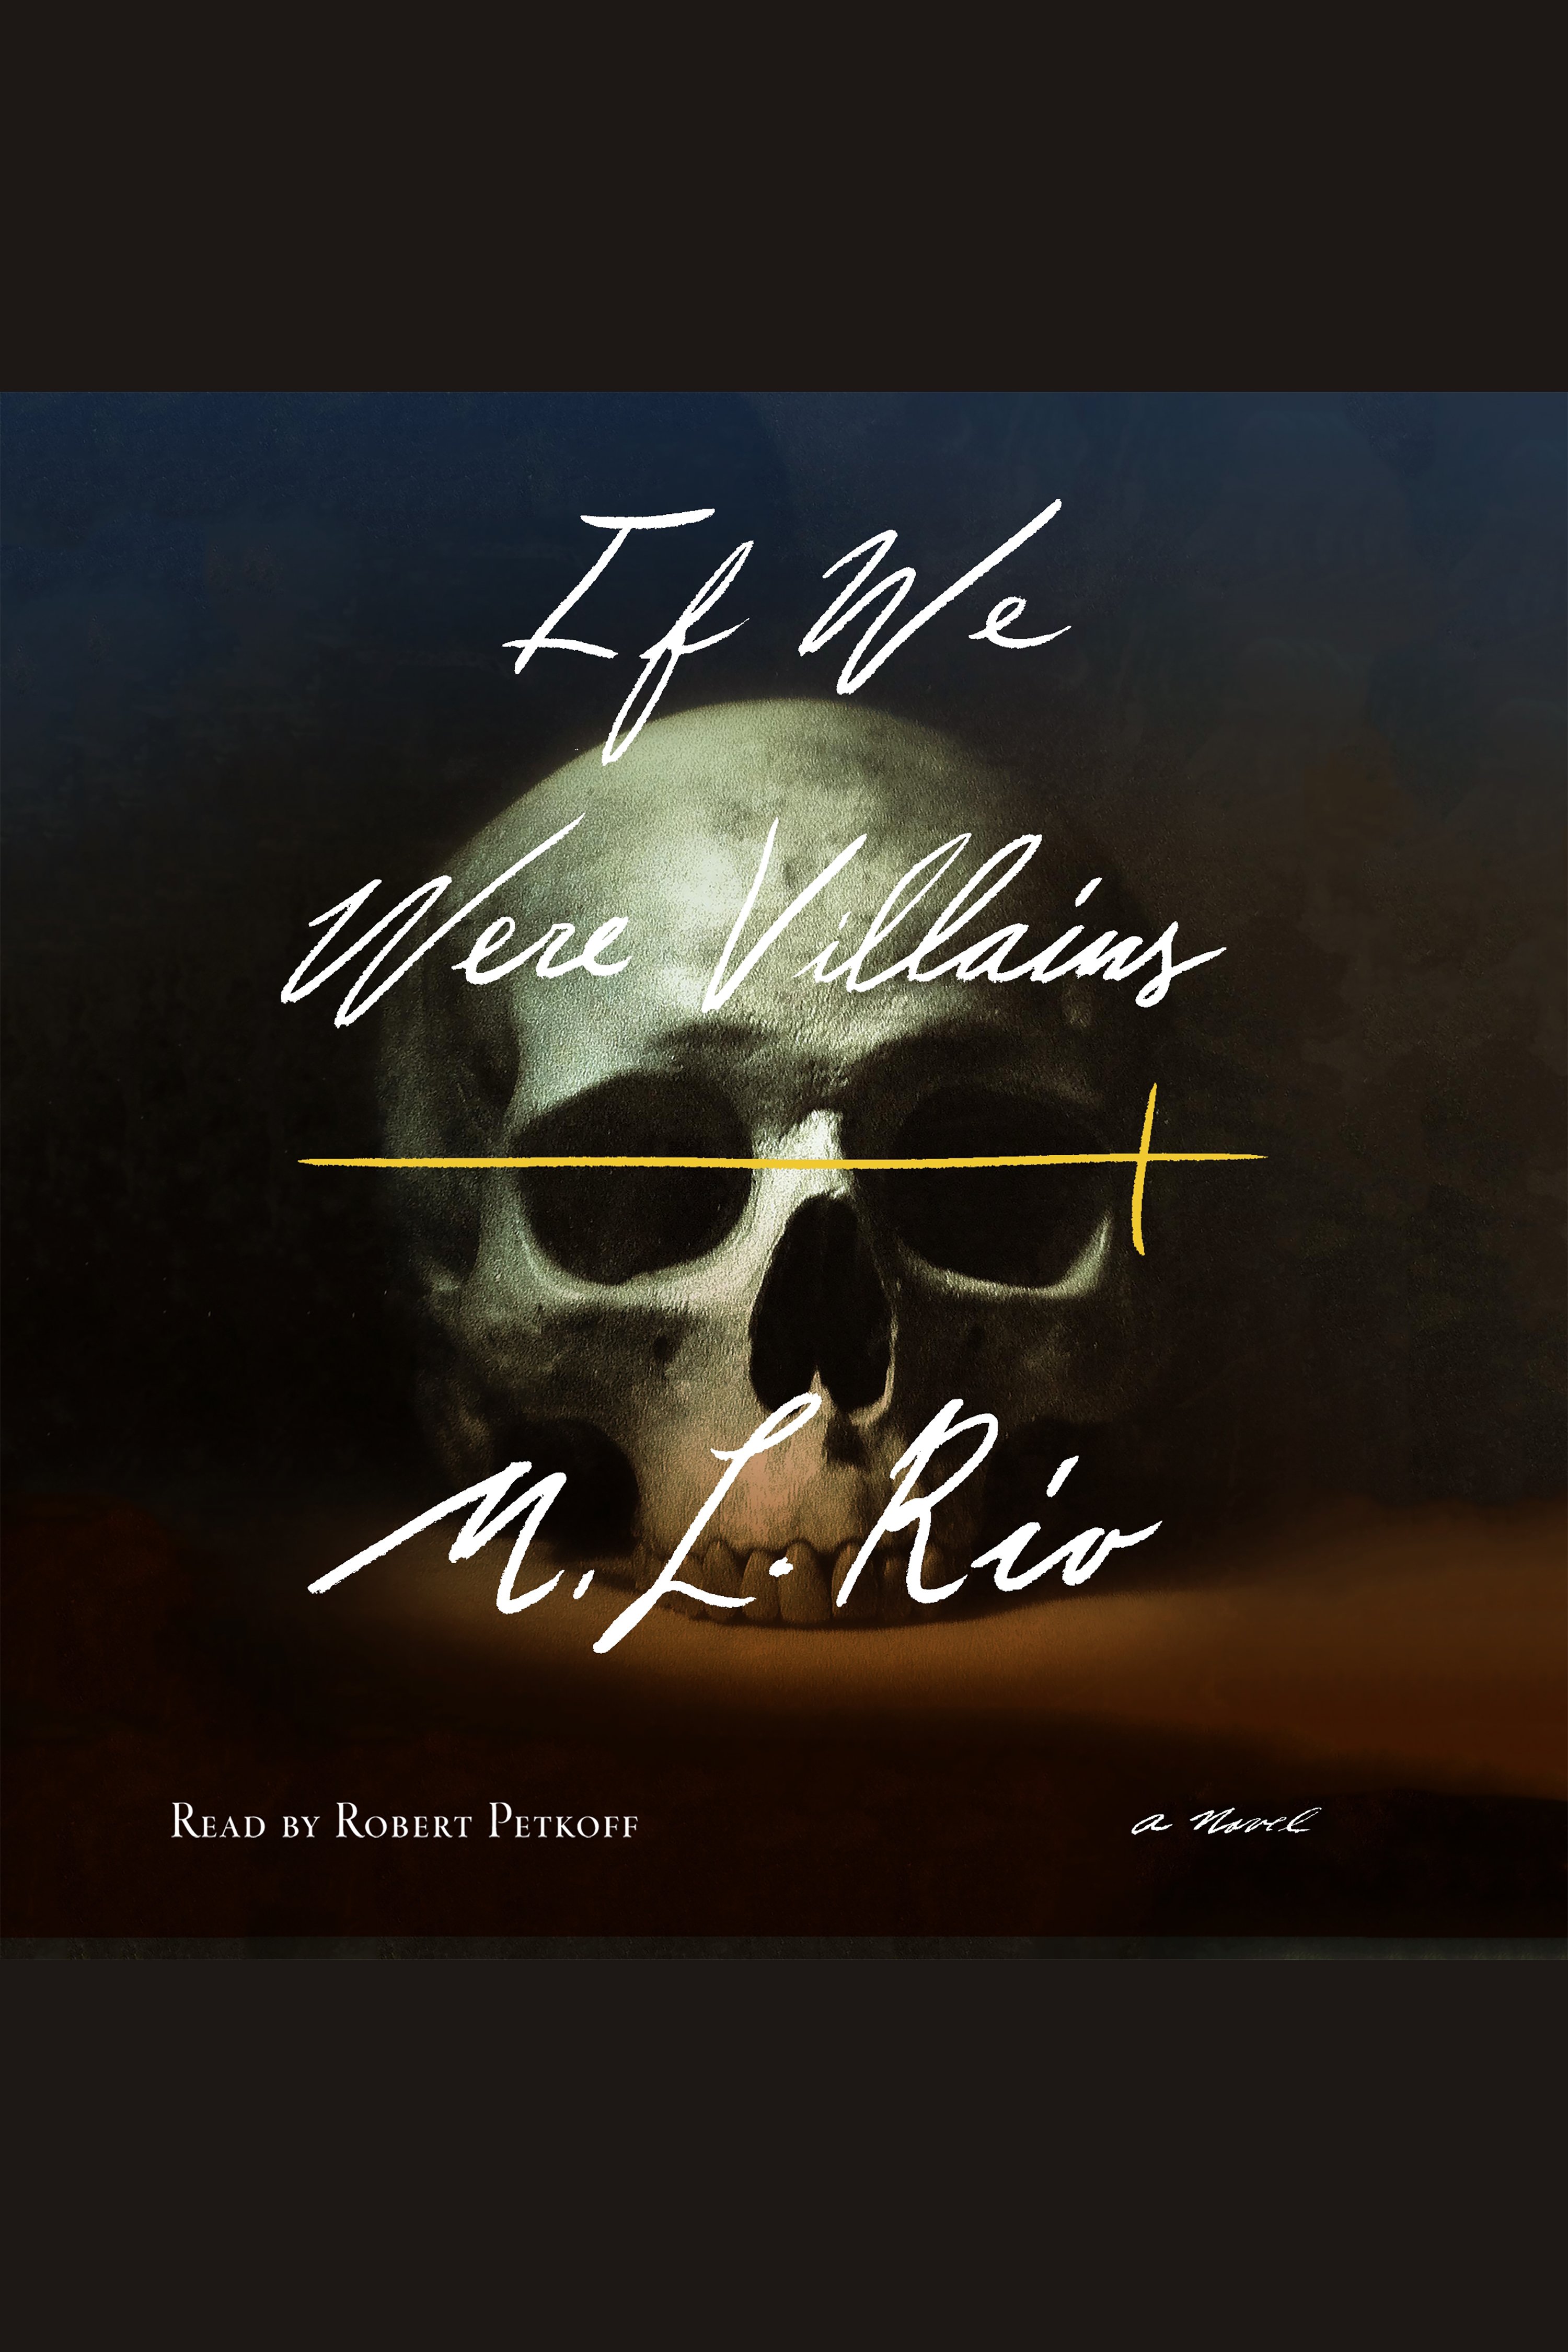 If We Were Villains cover image